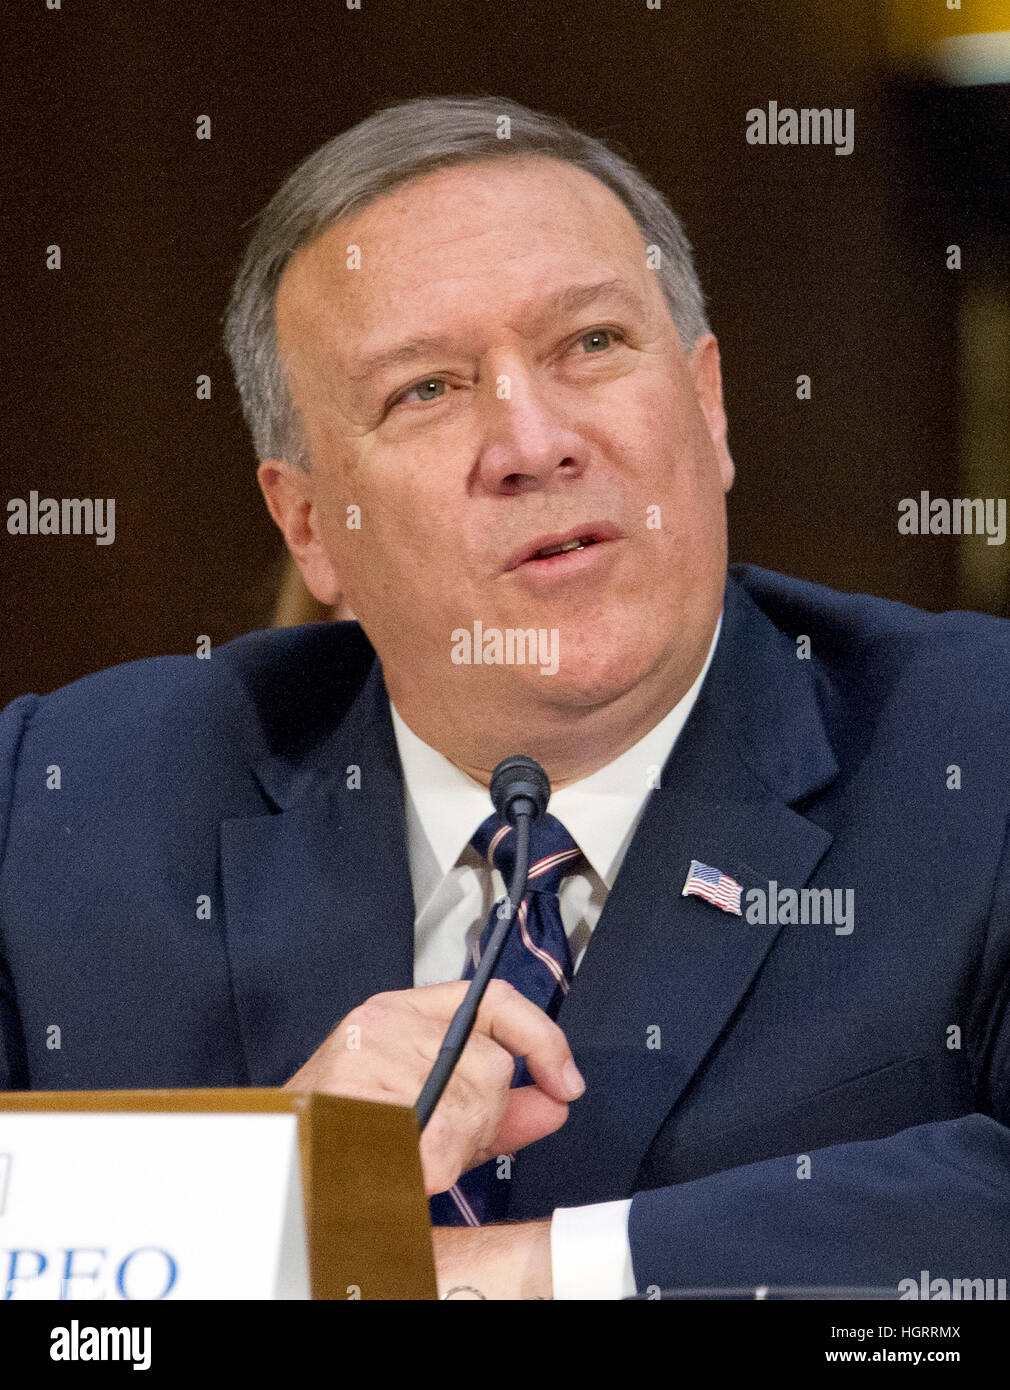 Washington DC, USA. 12th January 2017. United States Representative Mike Pompeo (Republican of Kansas) testifies before the US Senate Select Committee on Intelligence during a confirmation hearing on his nomination to be Director of the Central Intelligence Agency (CIA) on Capitol Hill in Washington, DC on Thursday, January 12, 2017. Credit: MediaPunch Inc/Alamy Live News Stock Photo